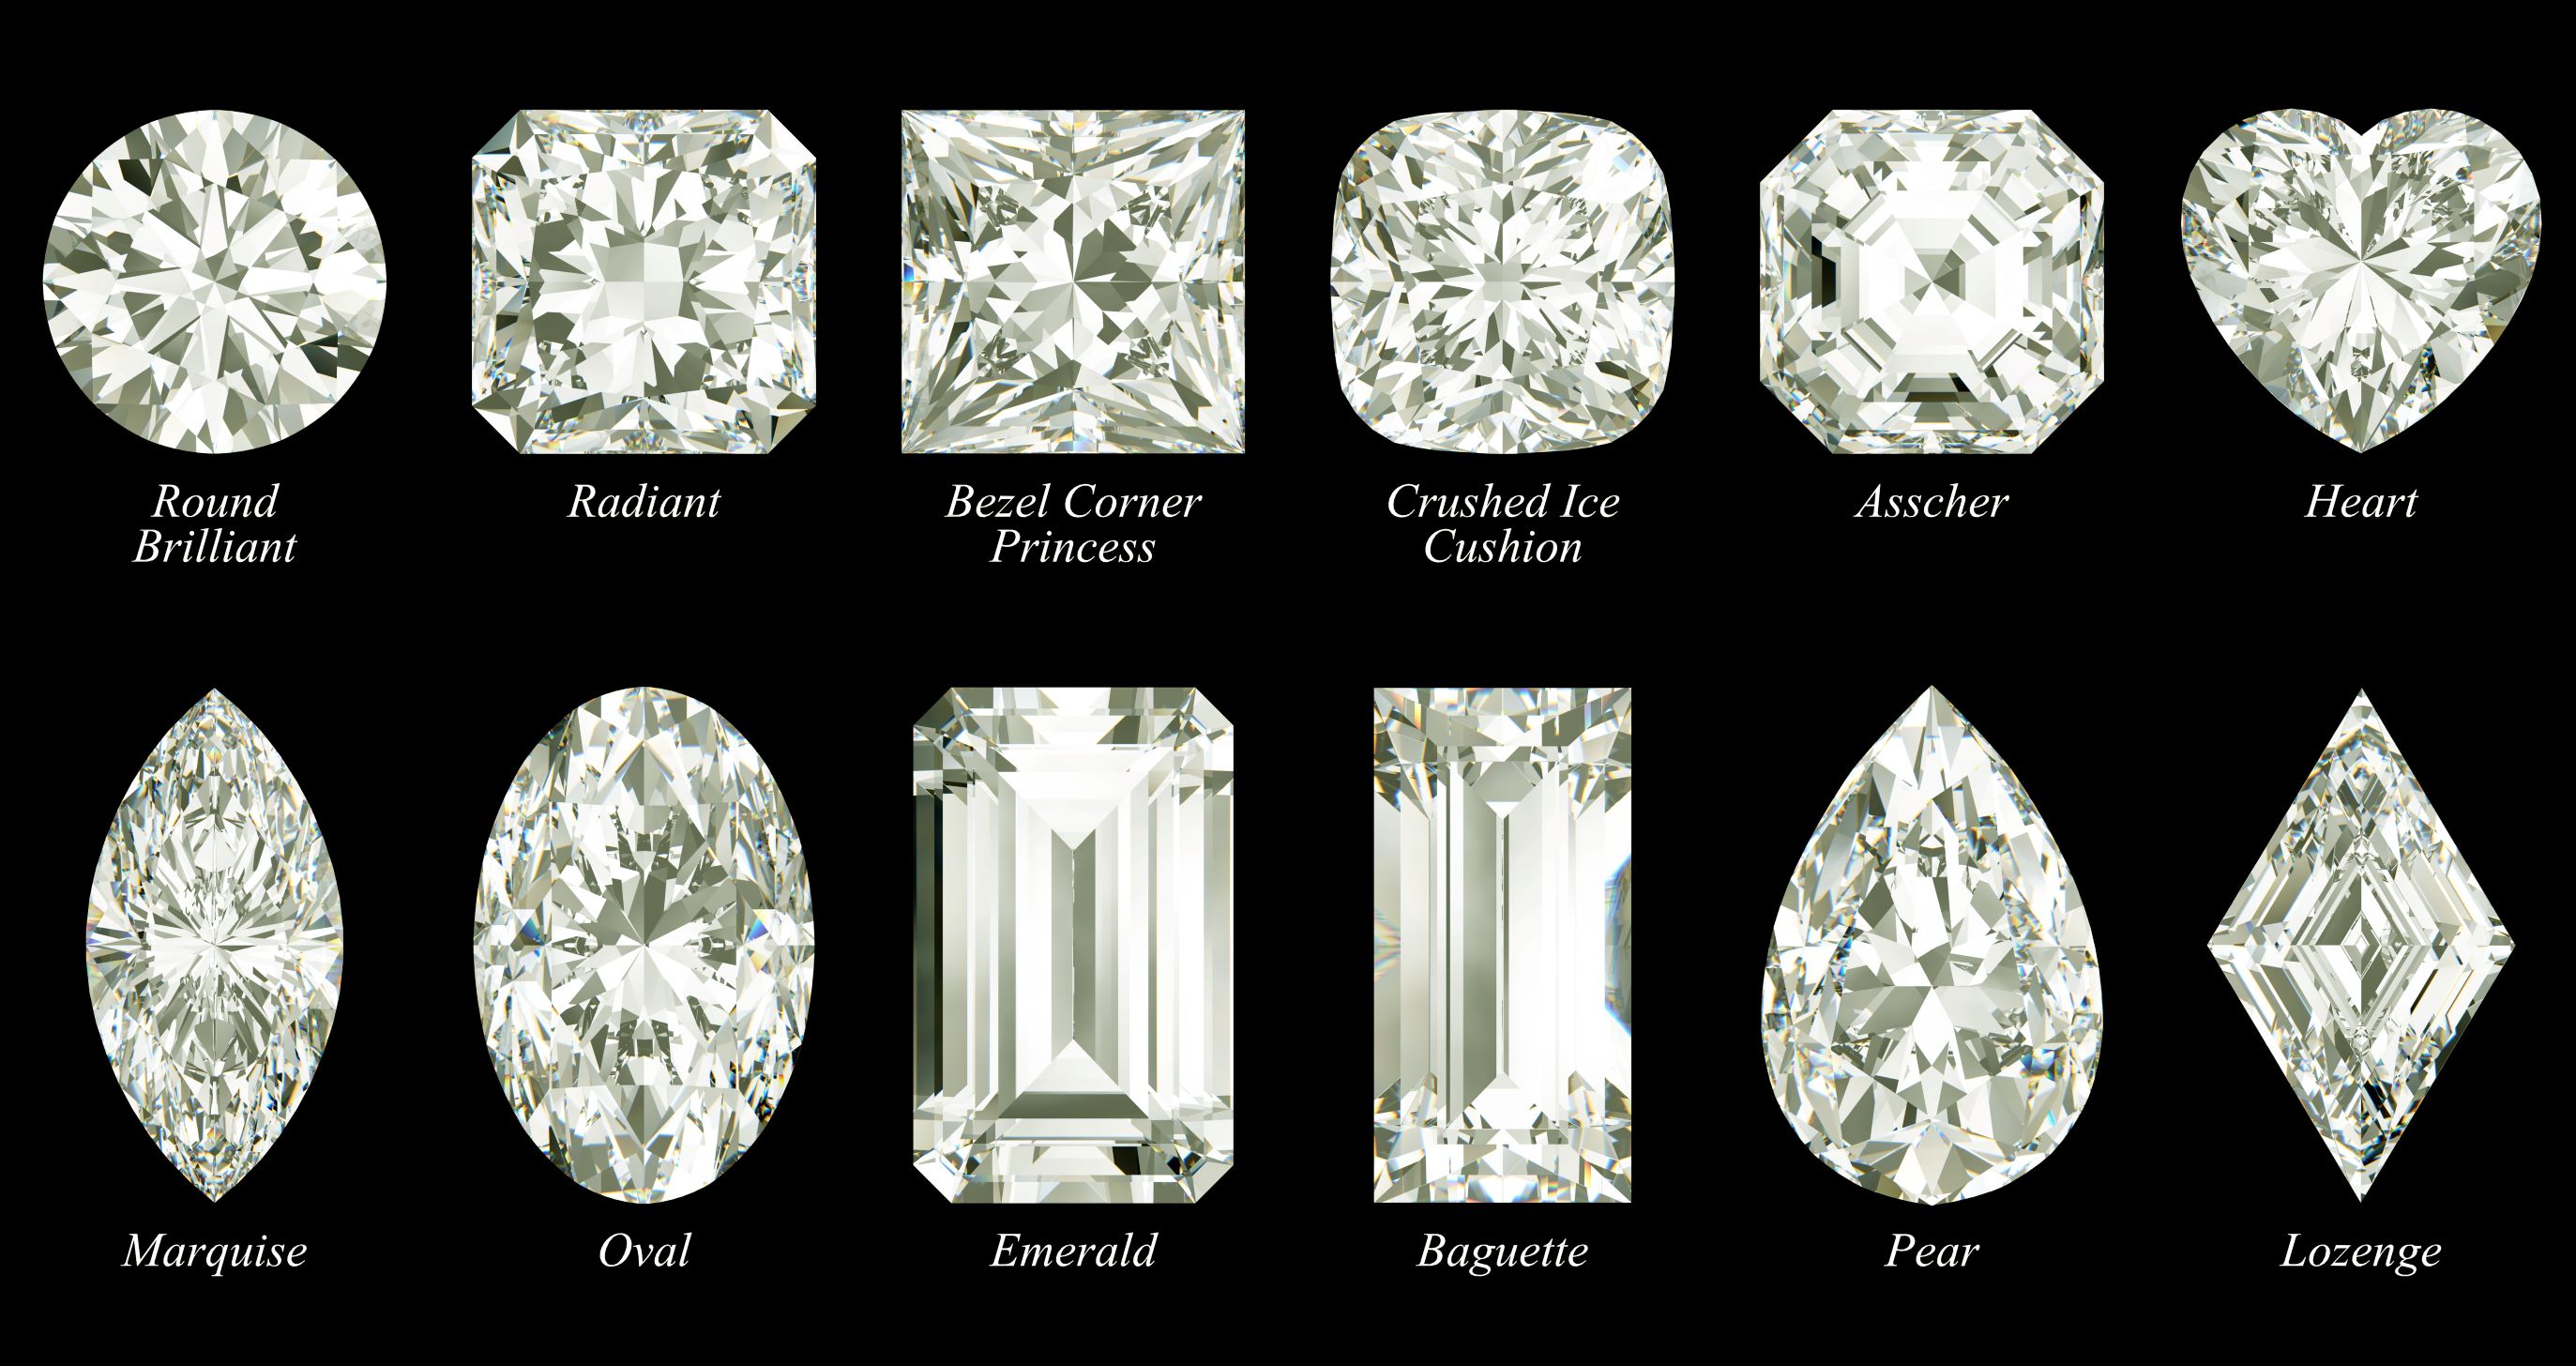 How is the process of creating lab diamonds different from traditional diamond mining?